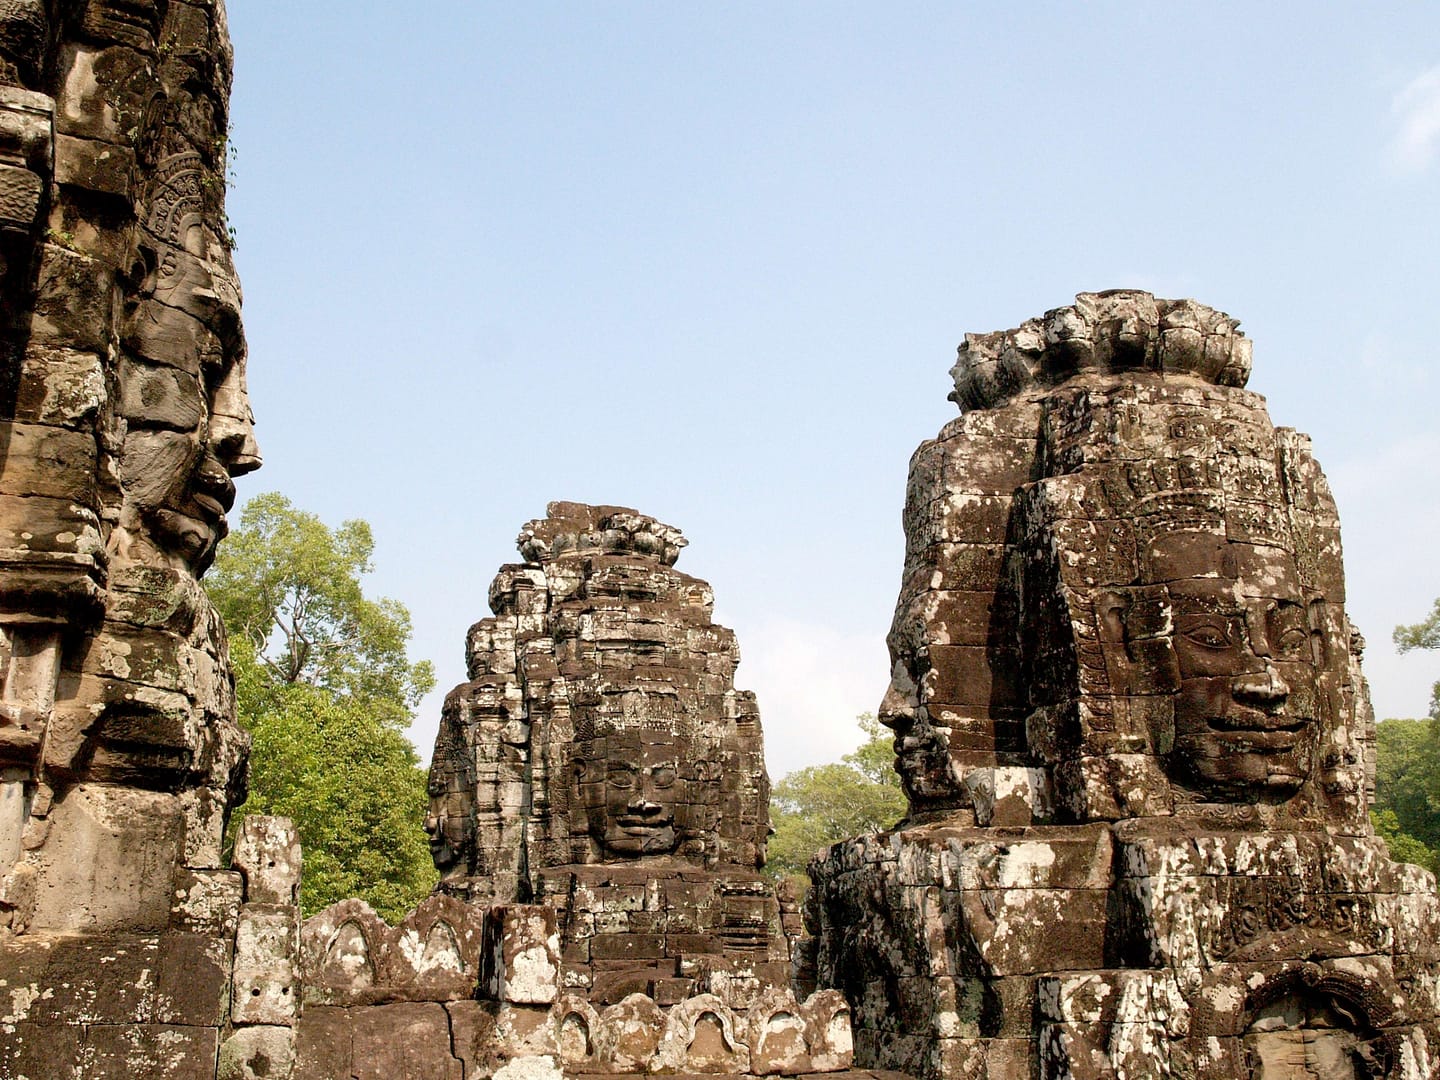 The Banyon temple complex at Angkor is just one of the many highlights of one of the greatest archeological sites in all of Asia. (Photo via https://www.publicdomainpictures.net/)